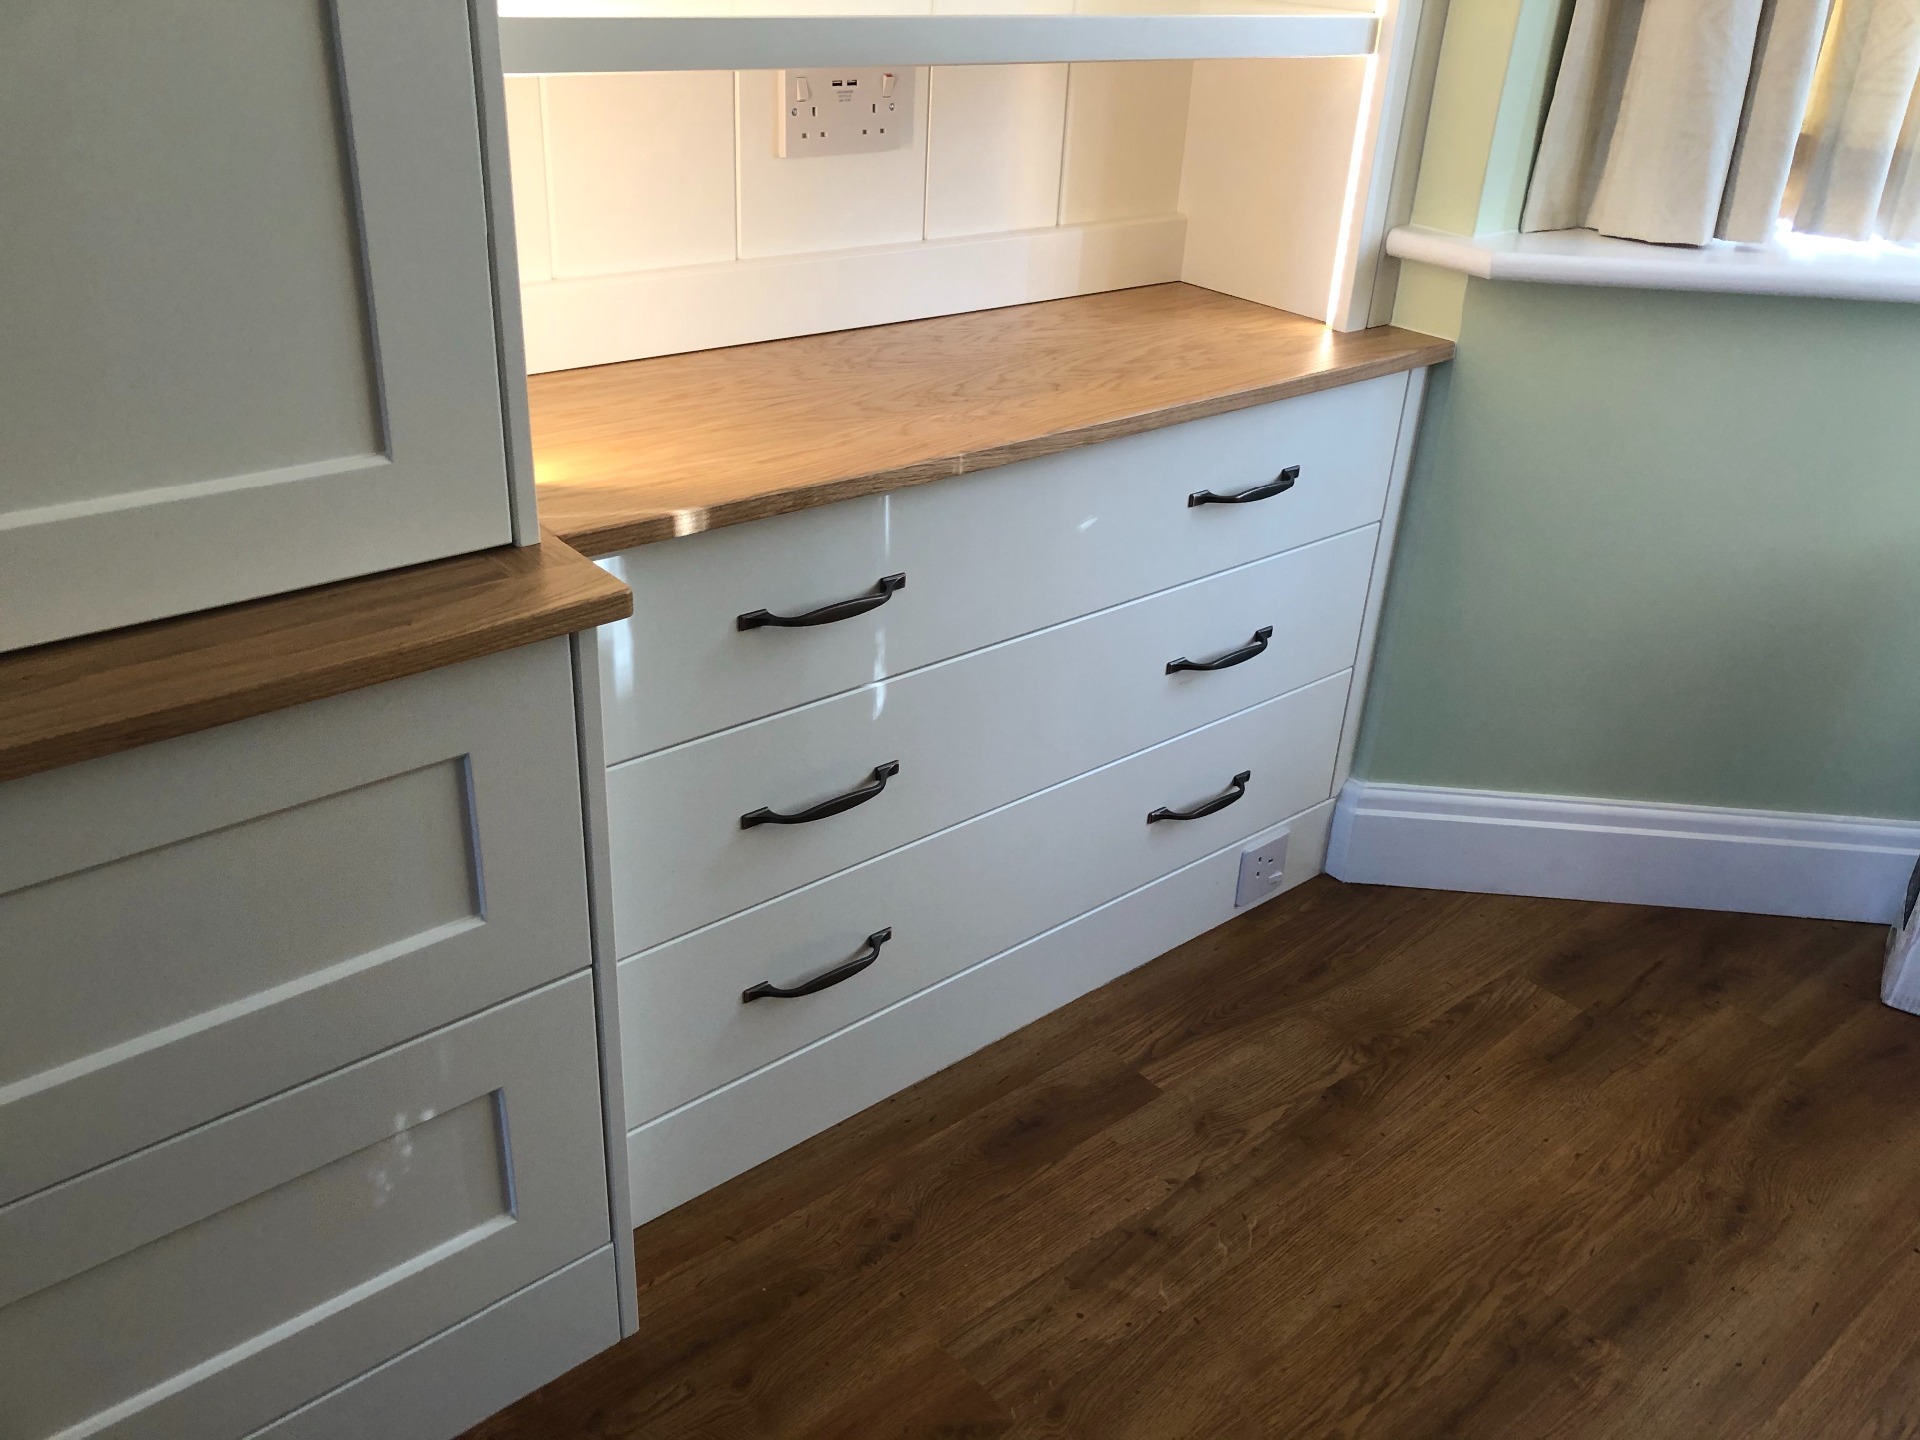 Fitted drawers